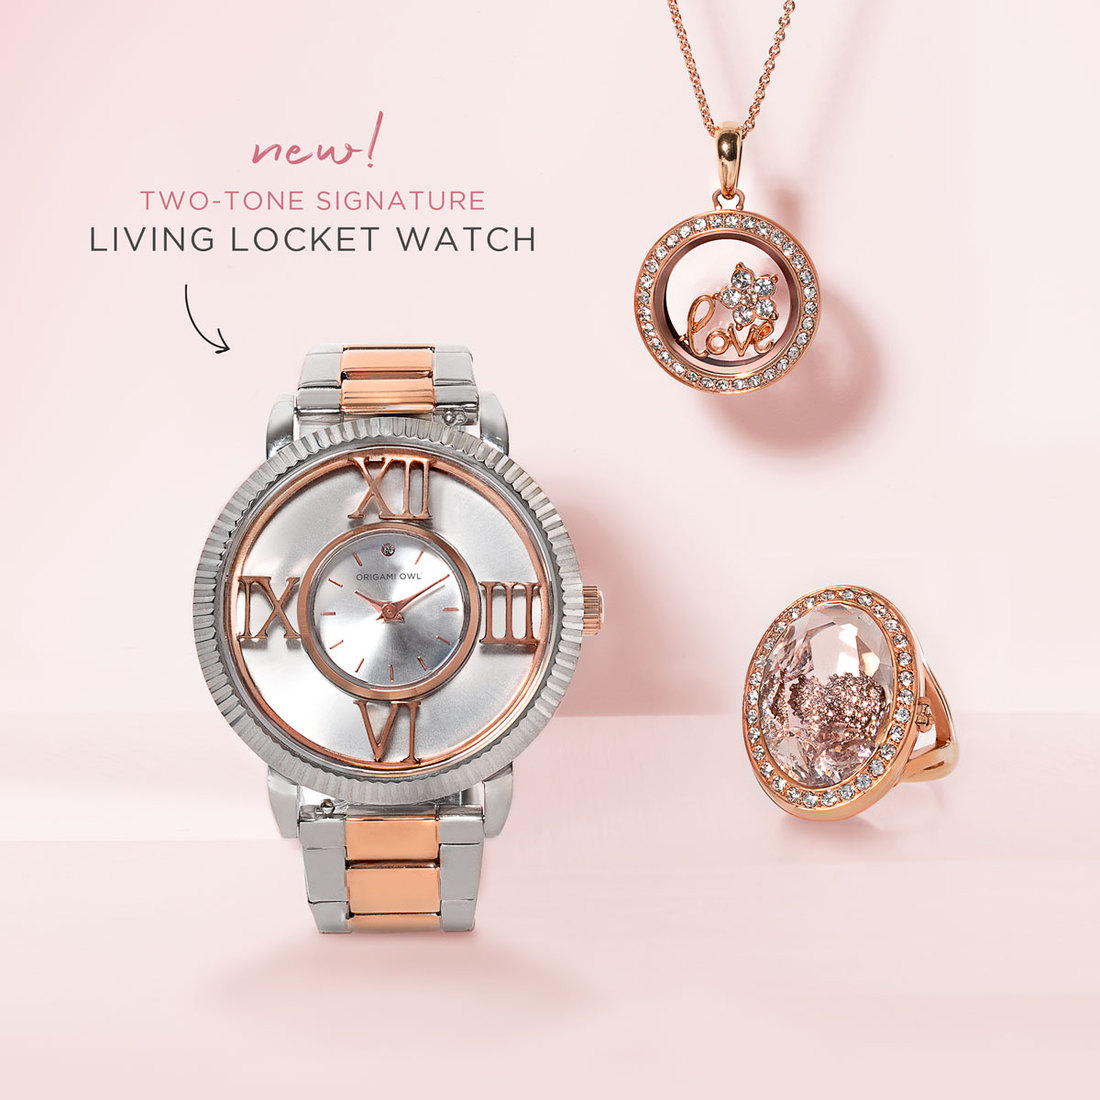 Origami Owl Locket Sizes The Origami Owl Custom Jewelry Spring 2019 Collection Direct Sales